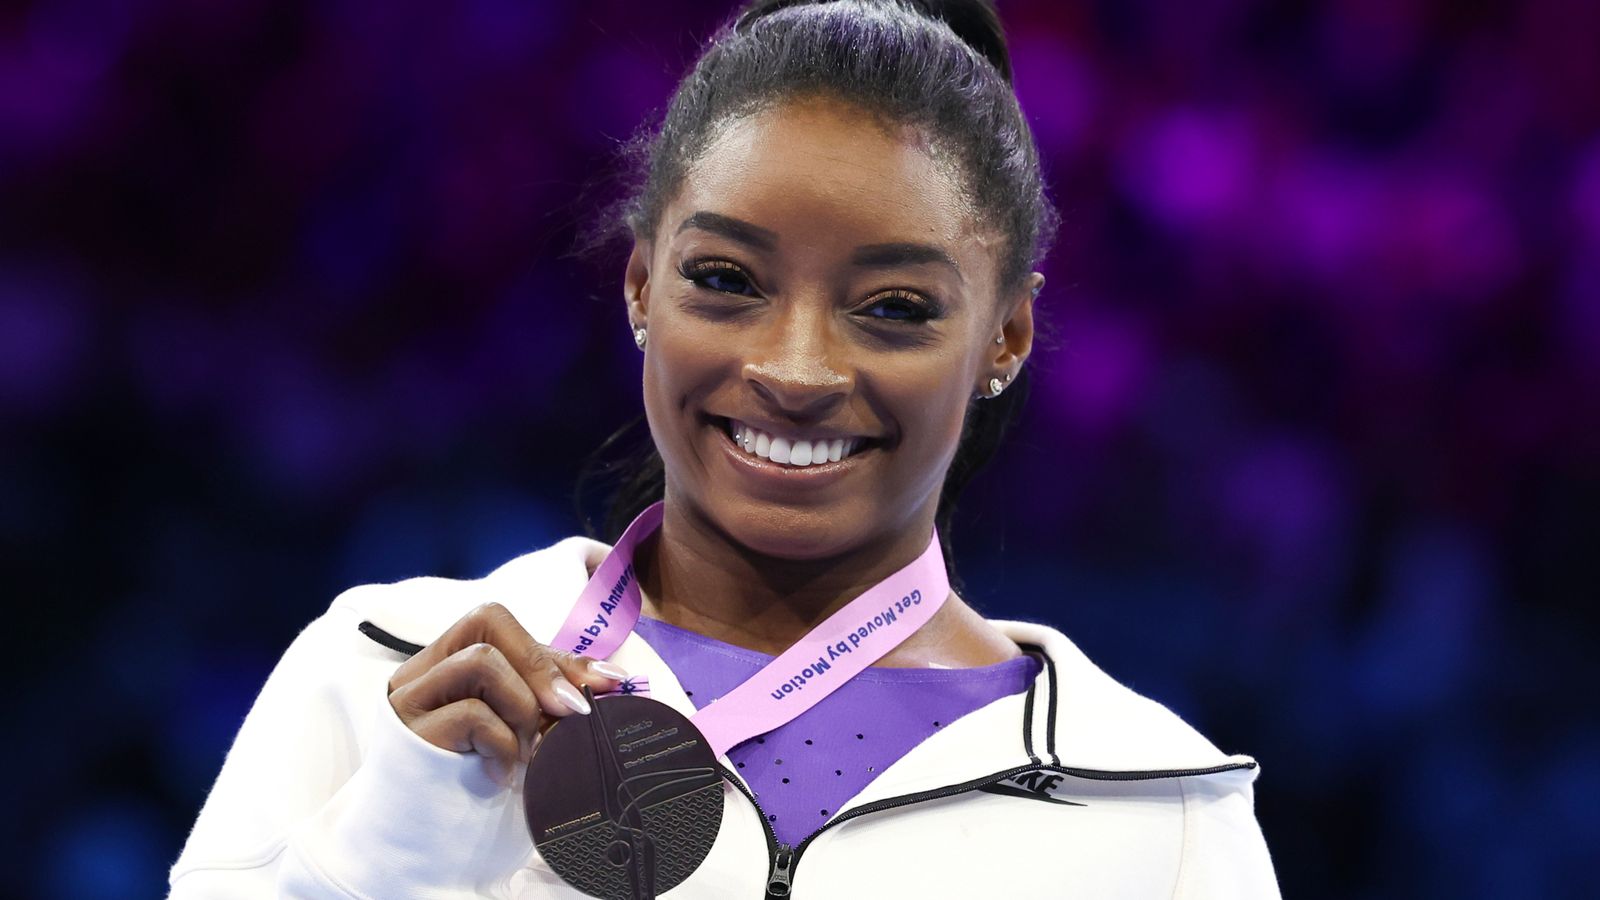 Simone Biles wins two more golds for the United States at world championships to extend gymnastics record |  Olympics News